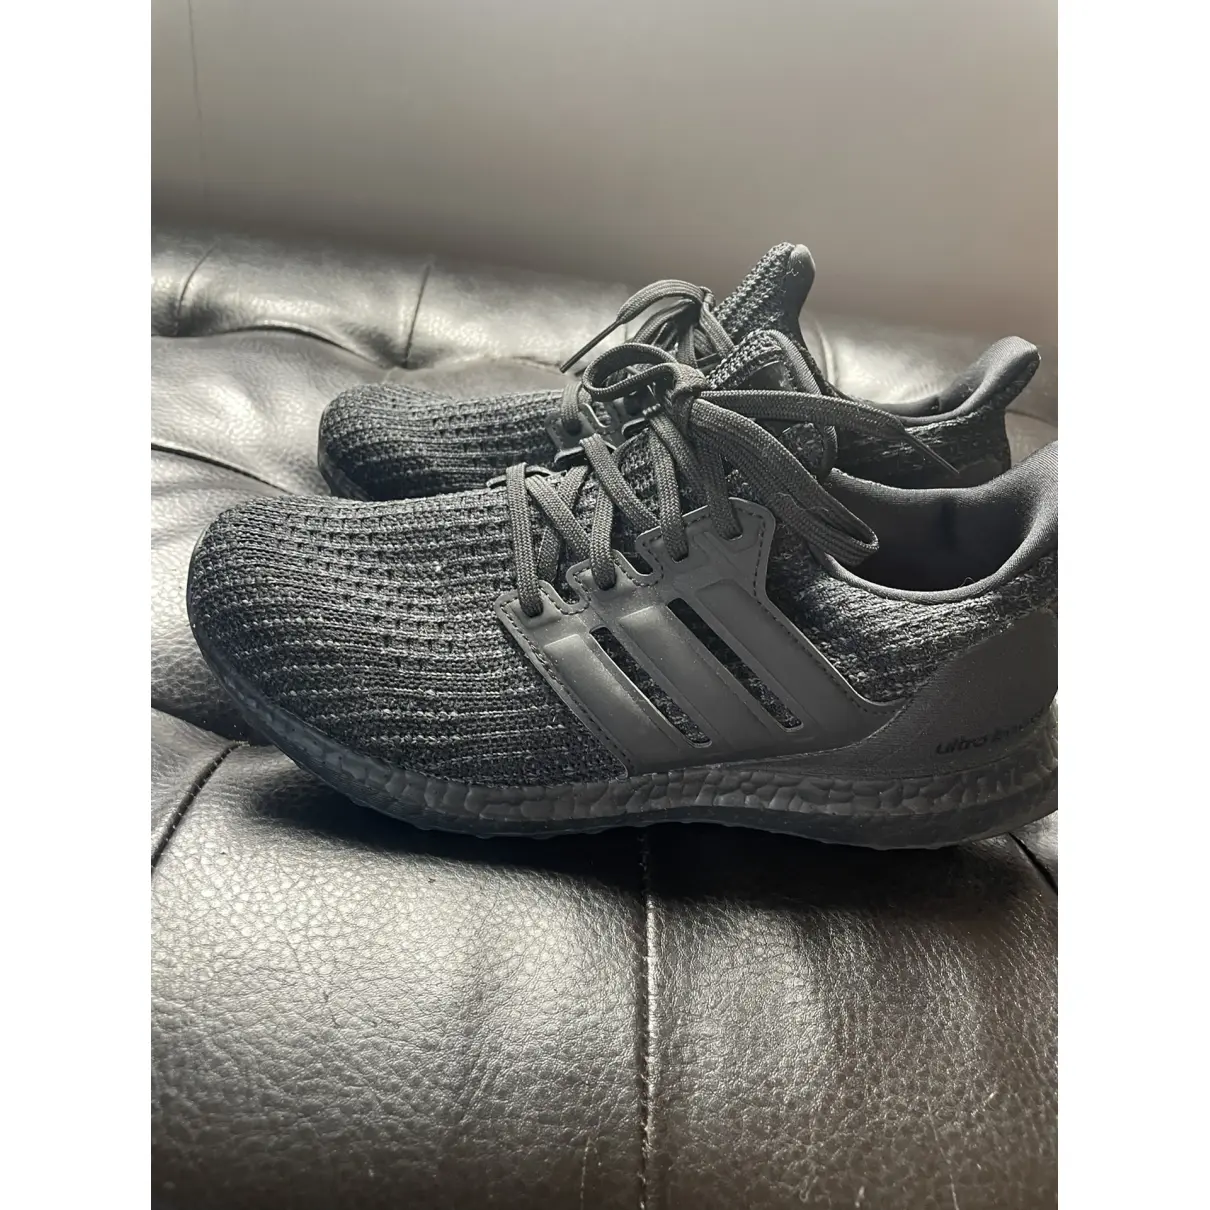 Buy Adidas Ultraboost cloth trainers online